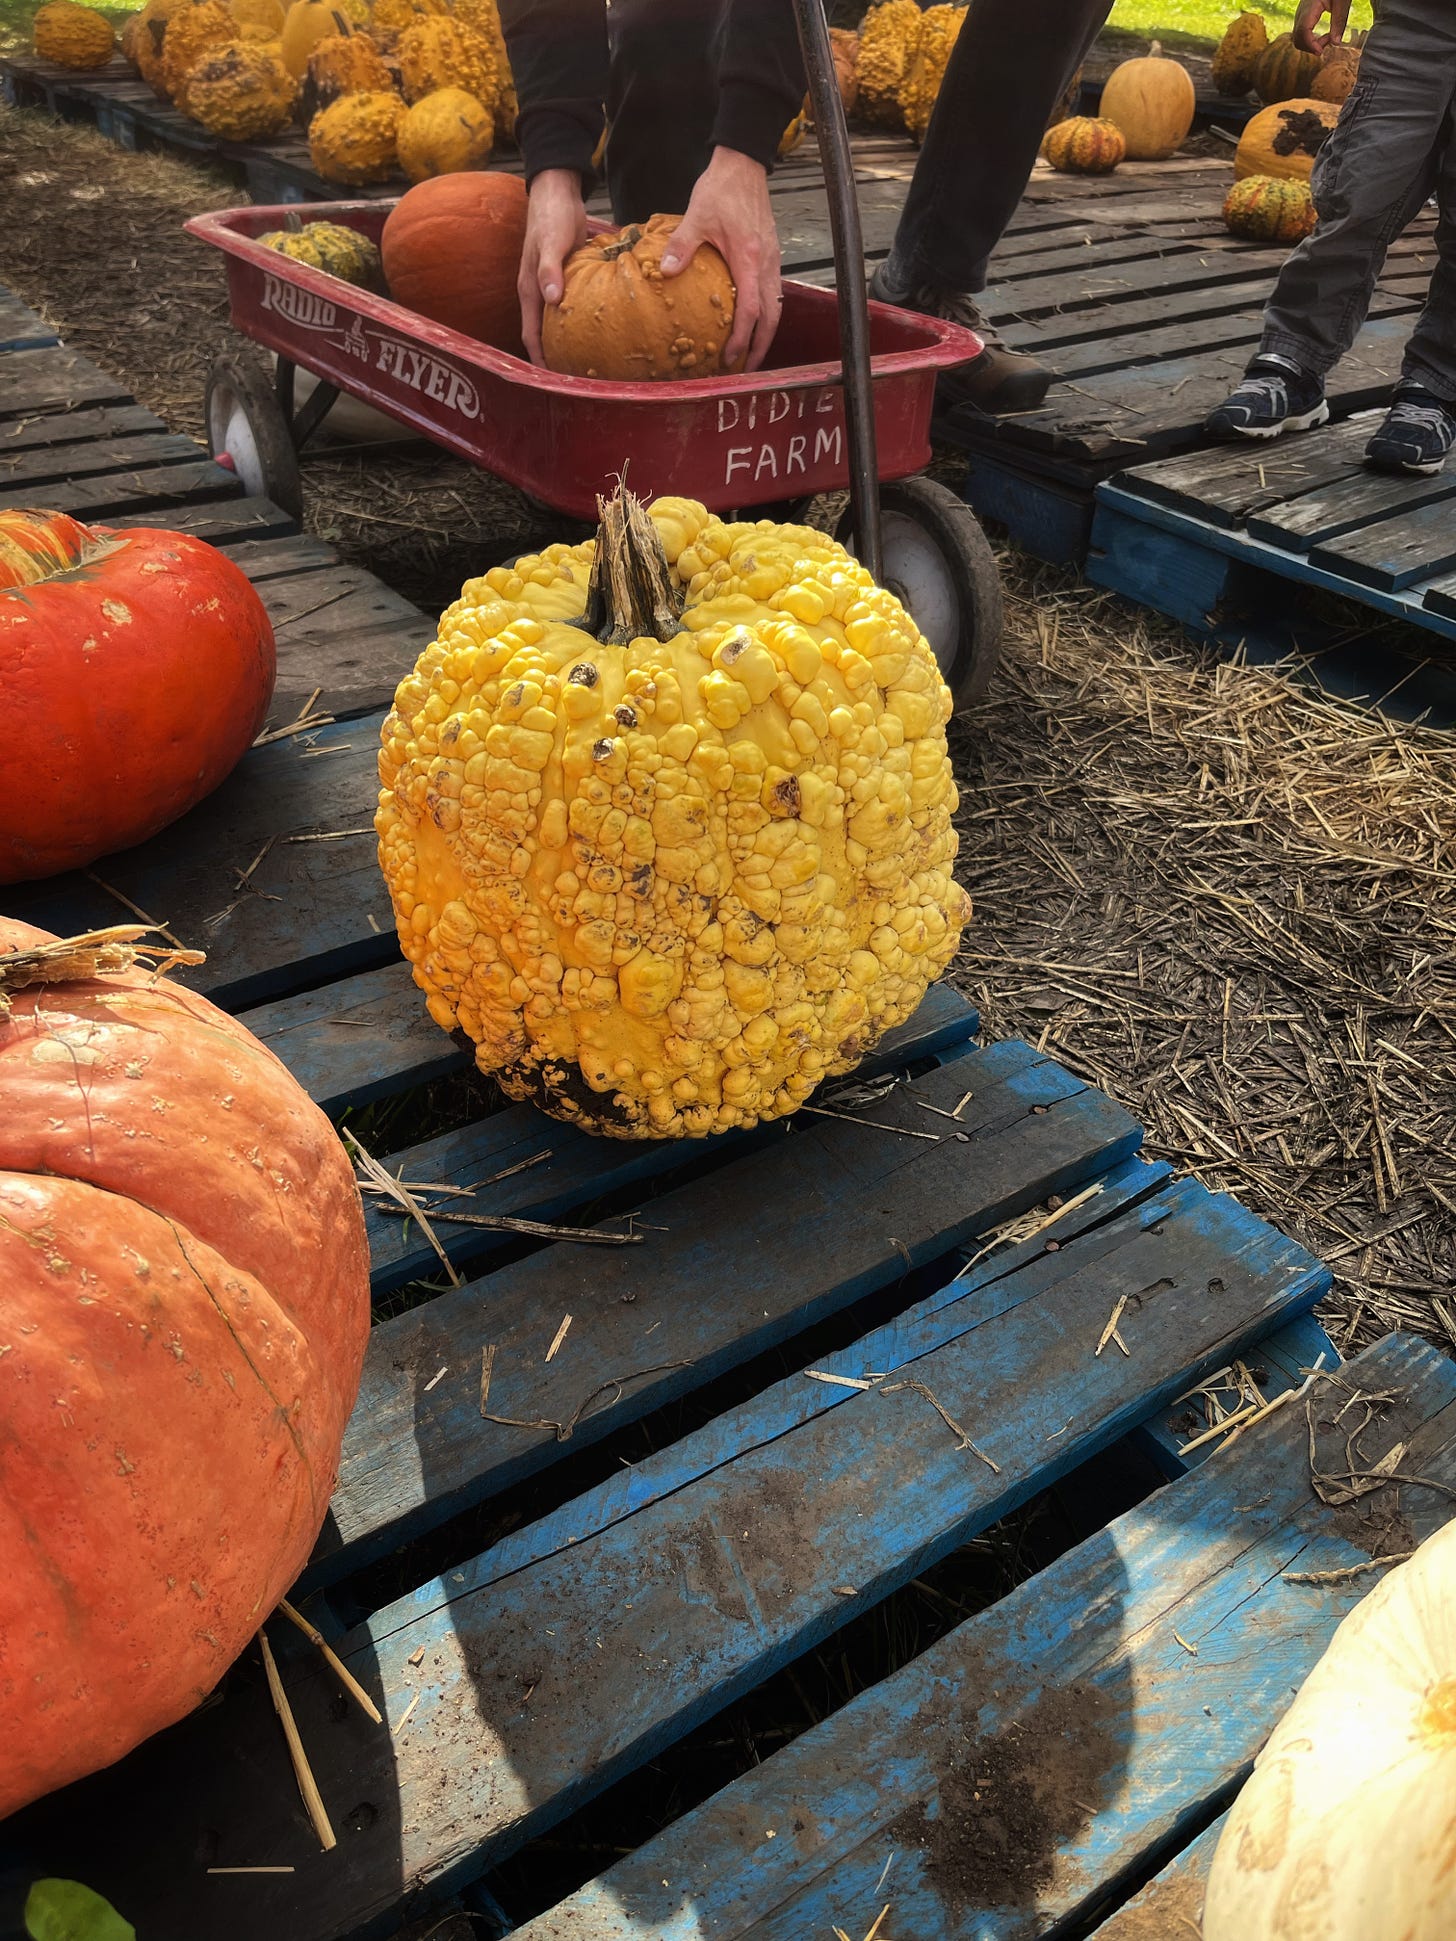 In the center foreground is a yellow pumpkin with lots of warty bumps. Beside it is a smooth orange pumpkin. in the background hands place another bumpy pumpkin in a Radioflyer red wagon. Other pumpkins in the background. 